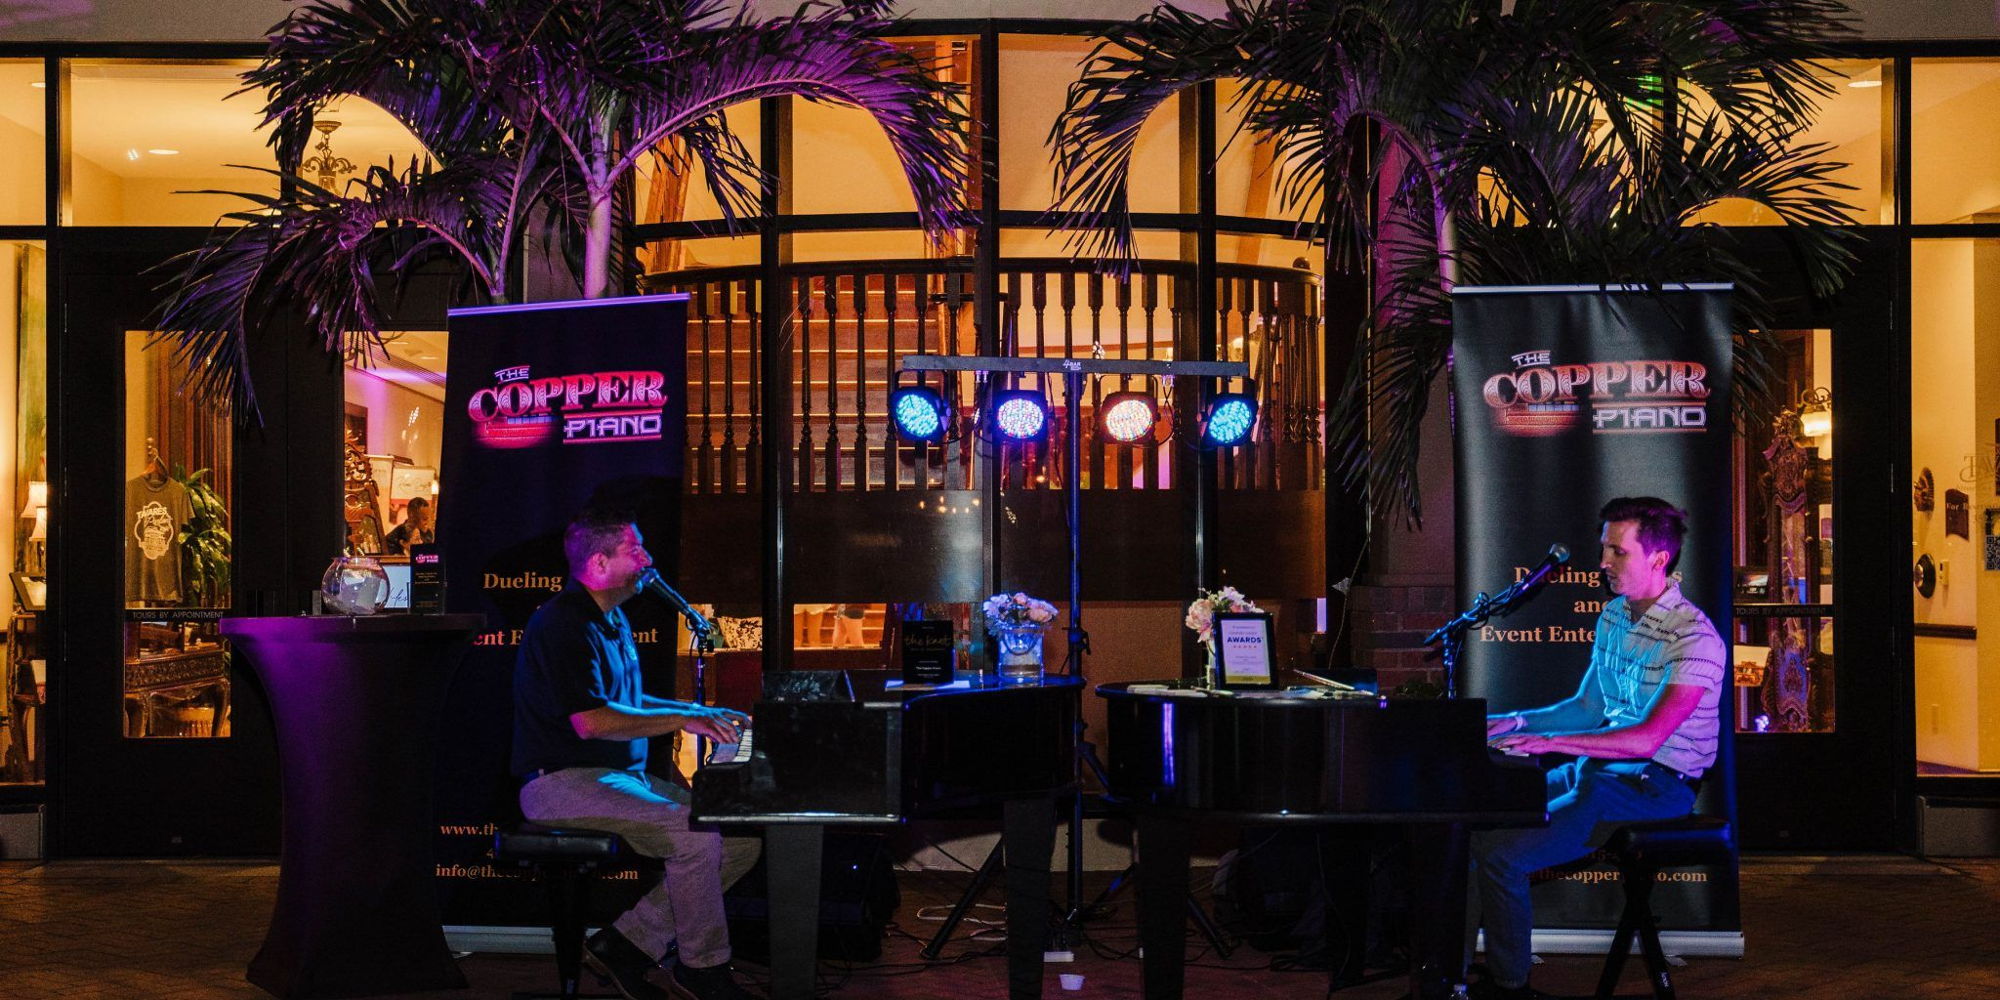 Dueling Pianos @ Daytona's Steakhouse at First Turn promotional image